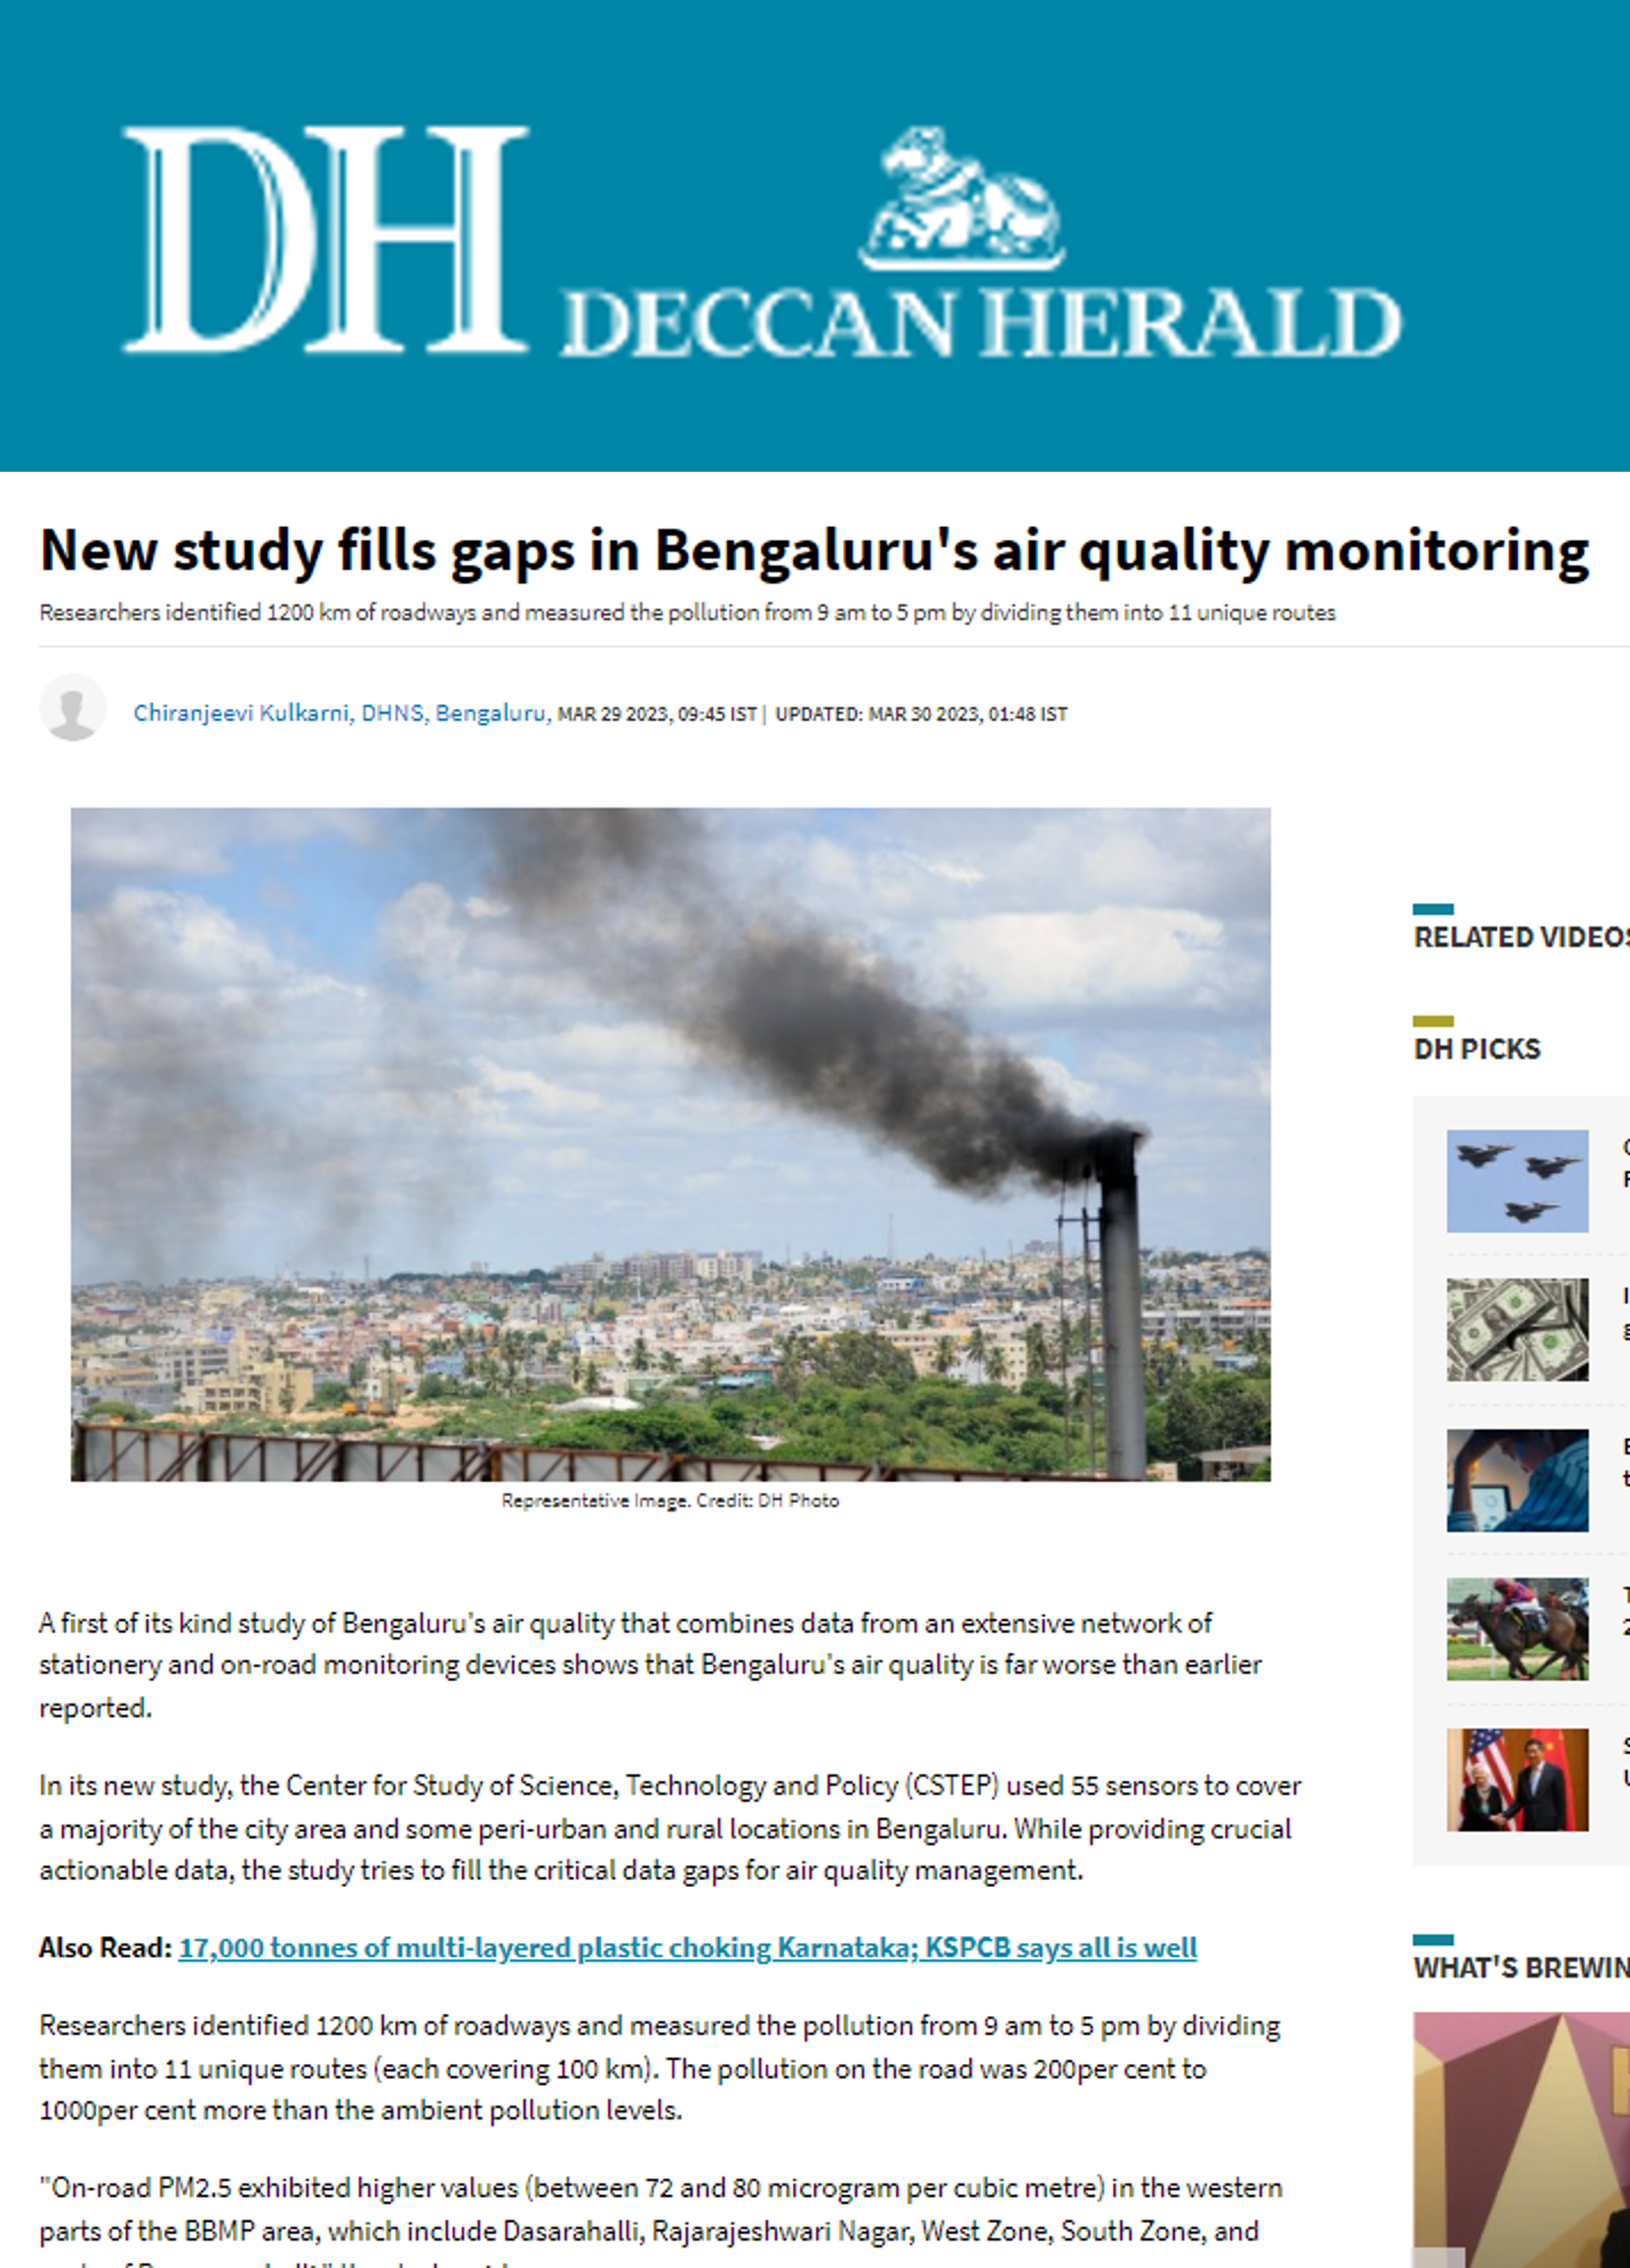 CSTEP’s study on air quality monitoring in Bengaluru covered by Deccan Herald